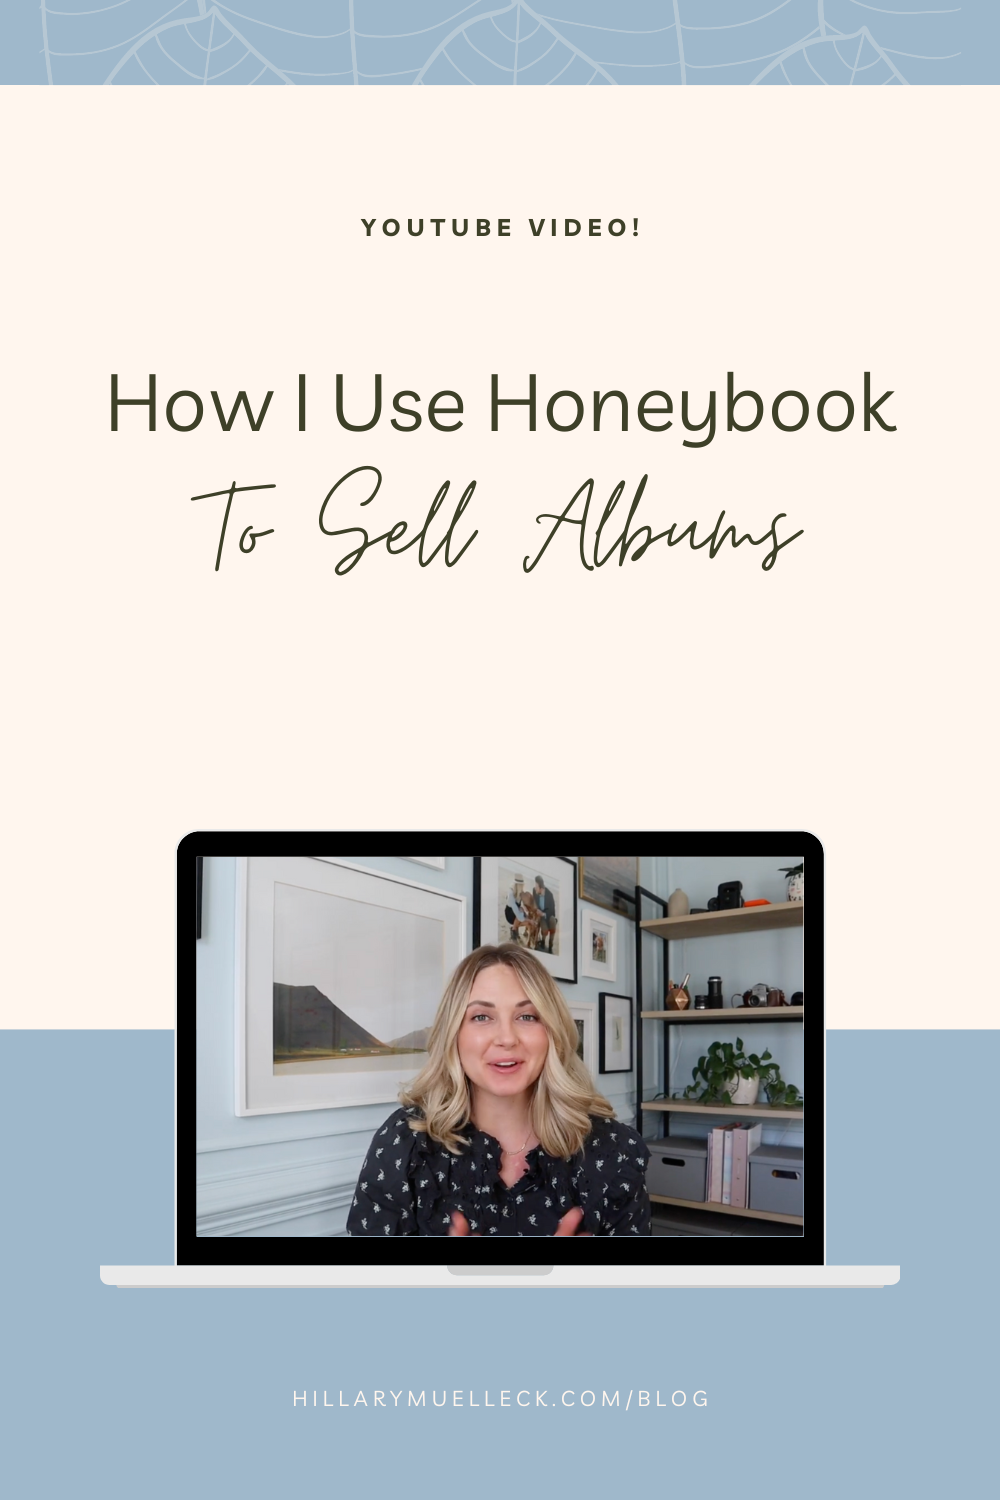 Hillary Muelleck, wedding photographer, shares how to use Honeybook to sell albums using her client album purchase guide